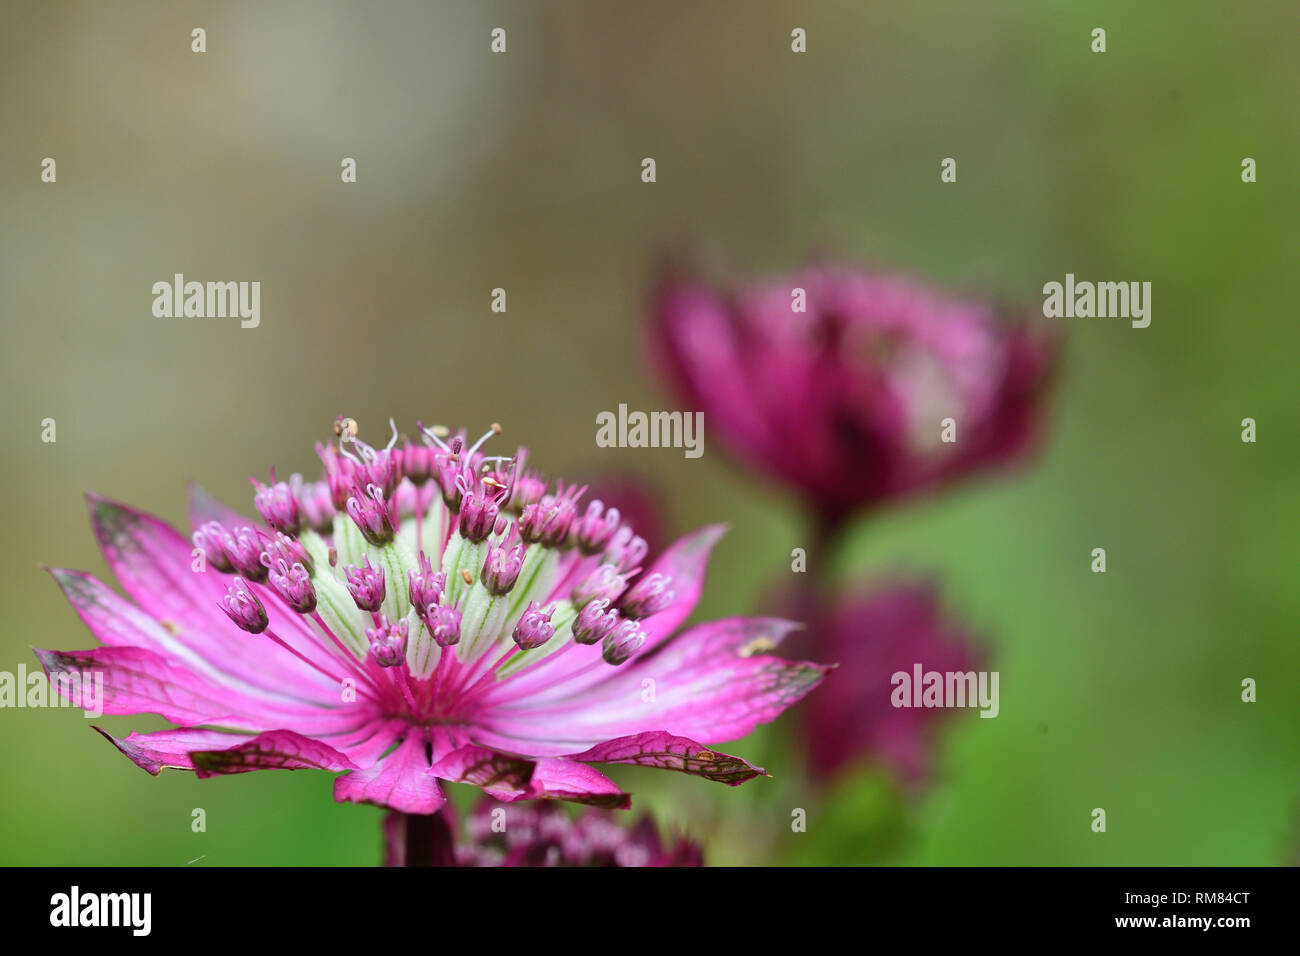 Macro shot of a pink astrantia flower in bloom Stock Photo